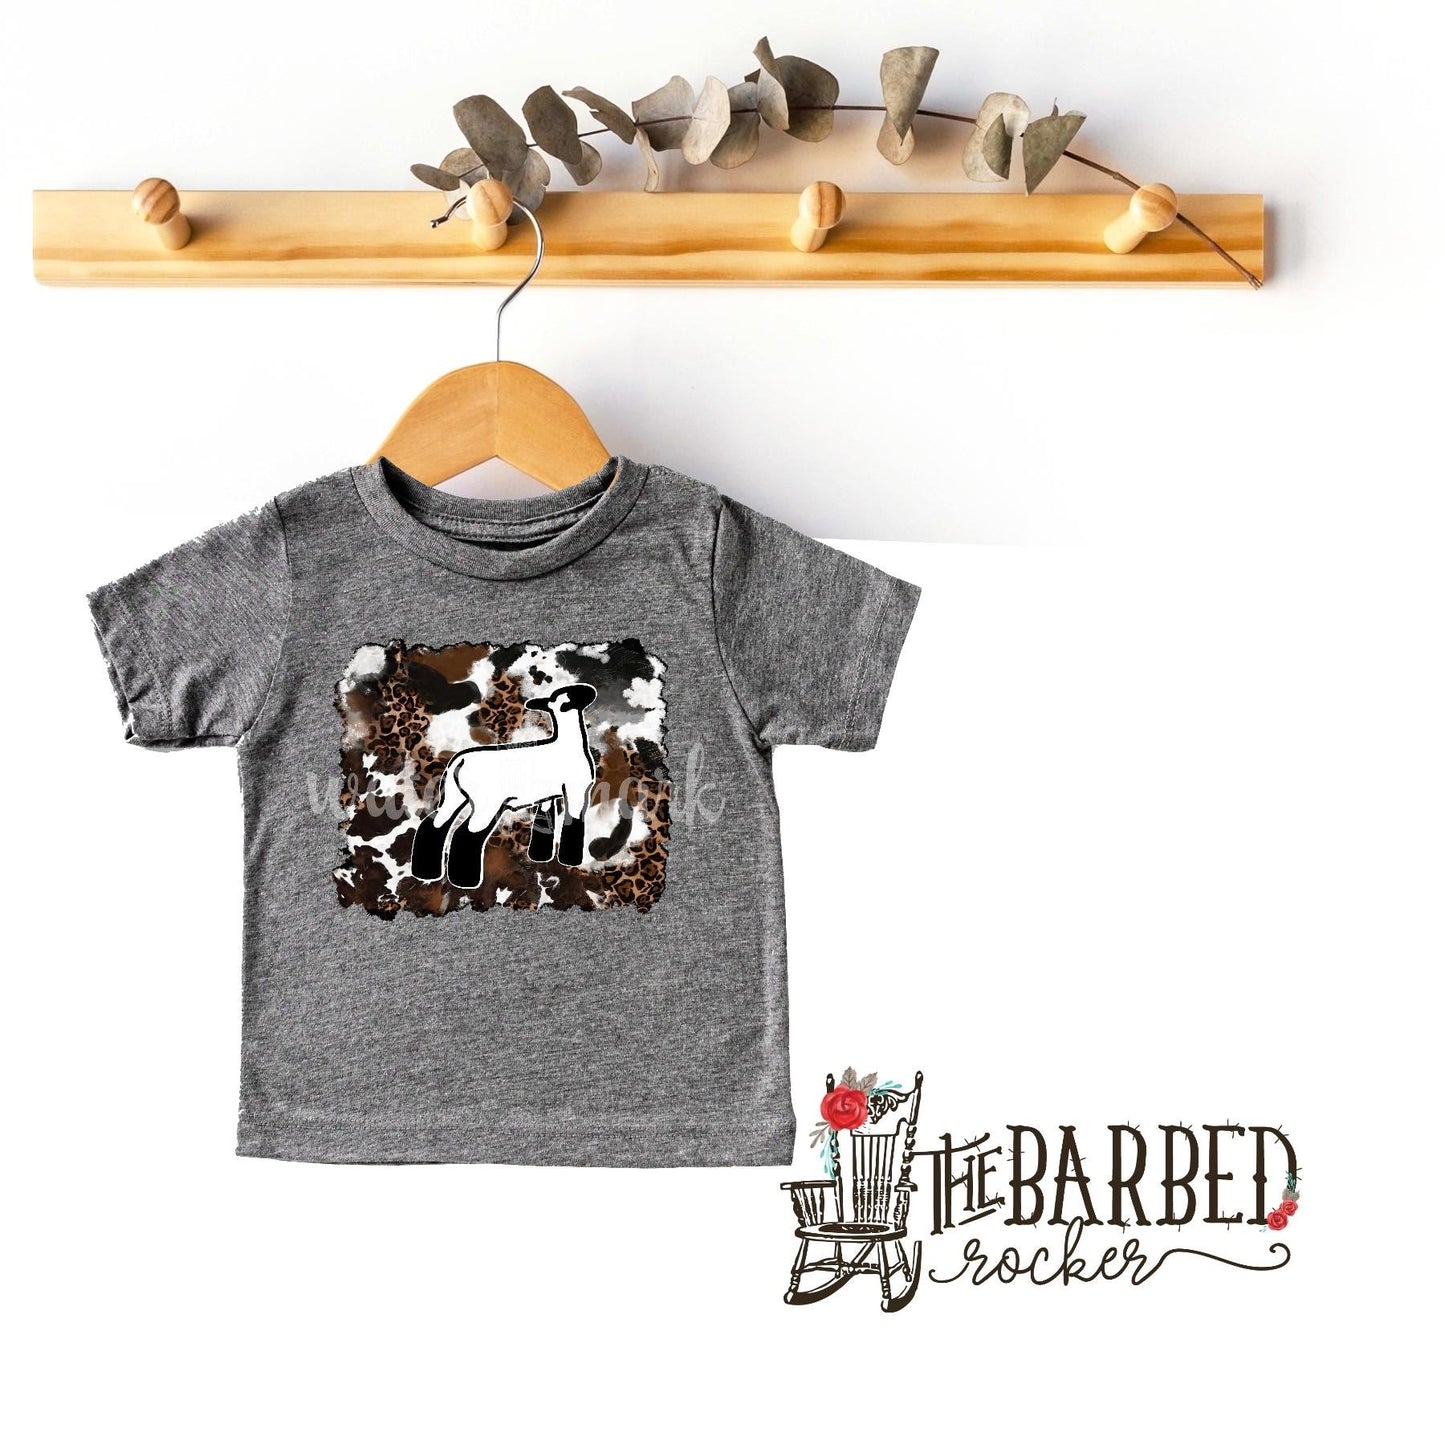 Infant Cowhide Background Stockshow T-Shirt Show Girl